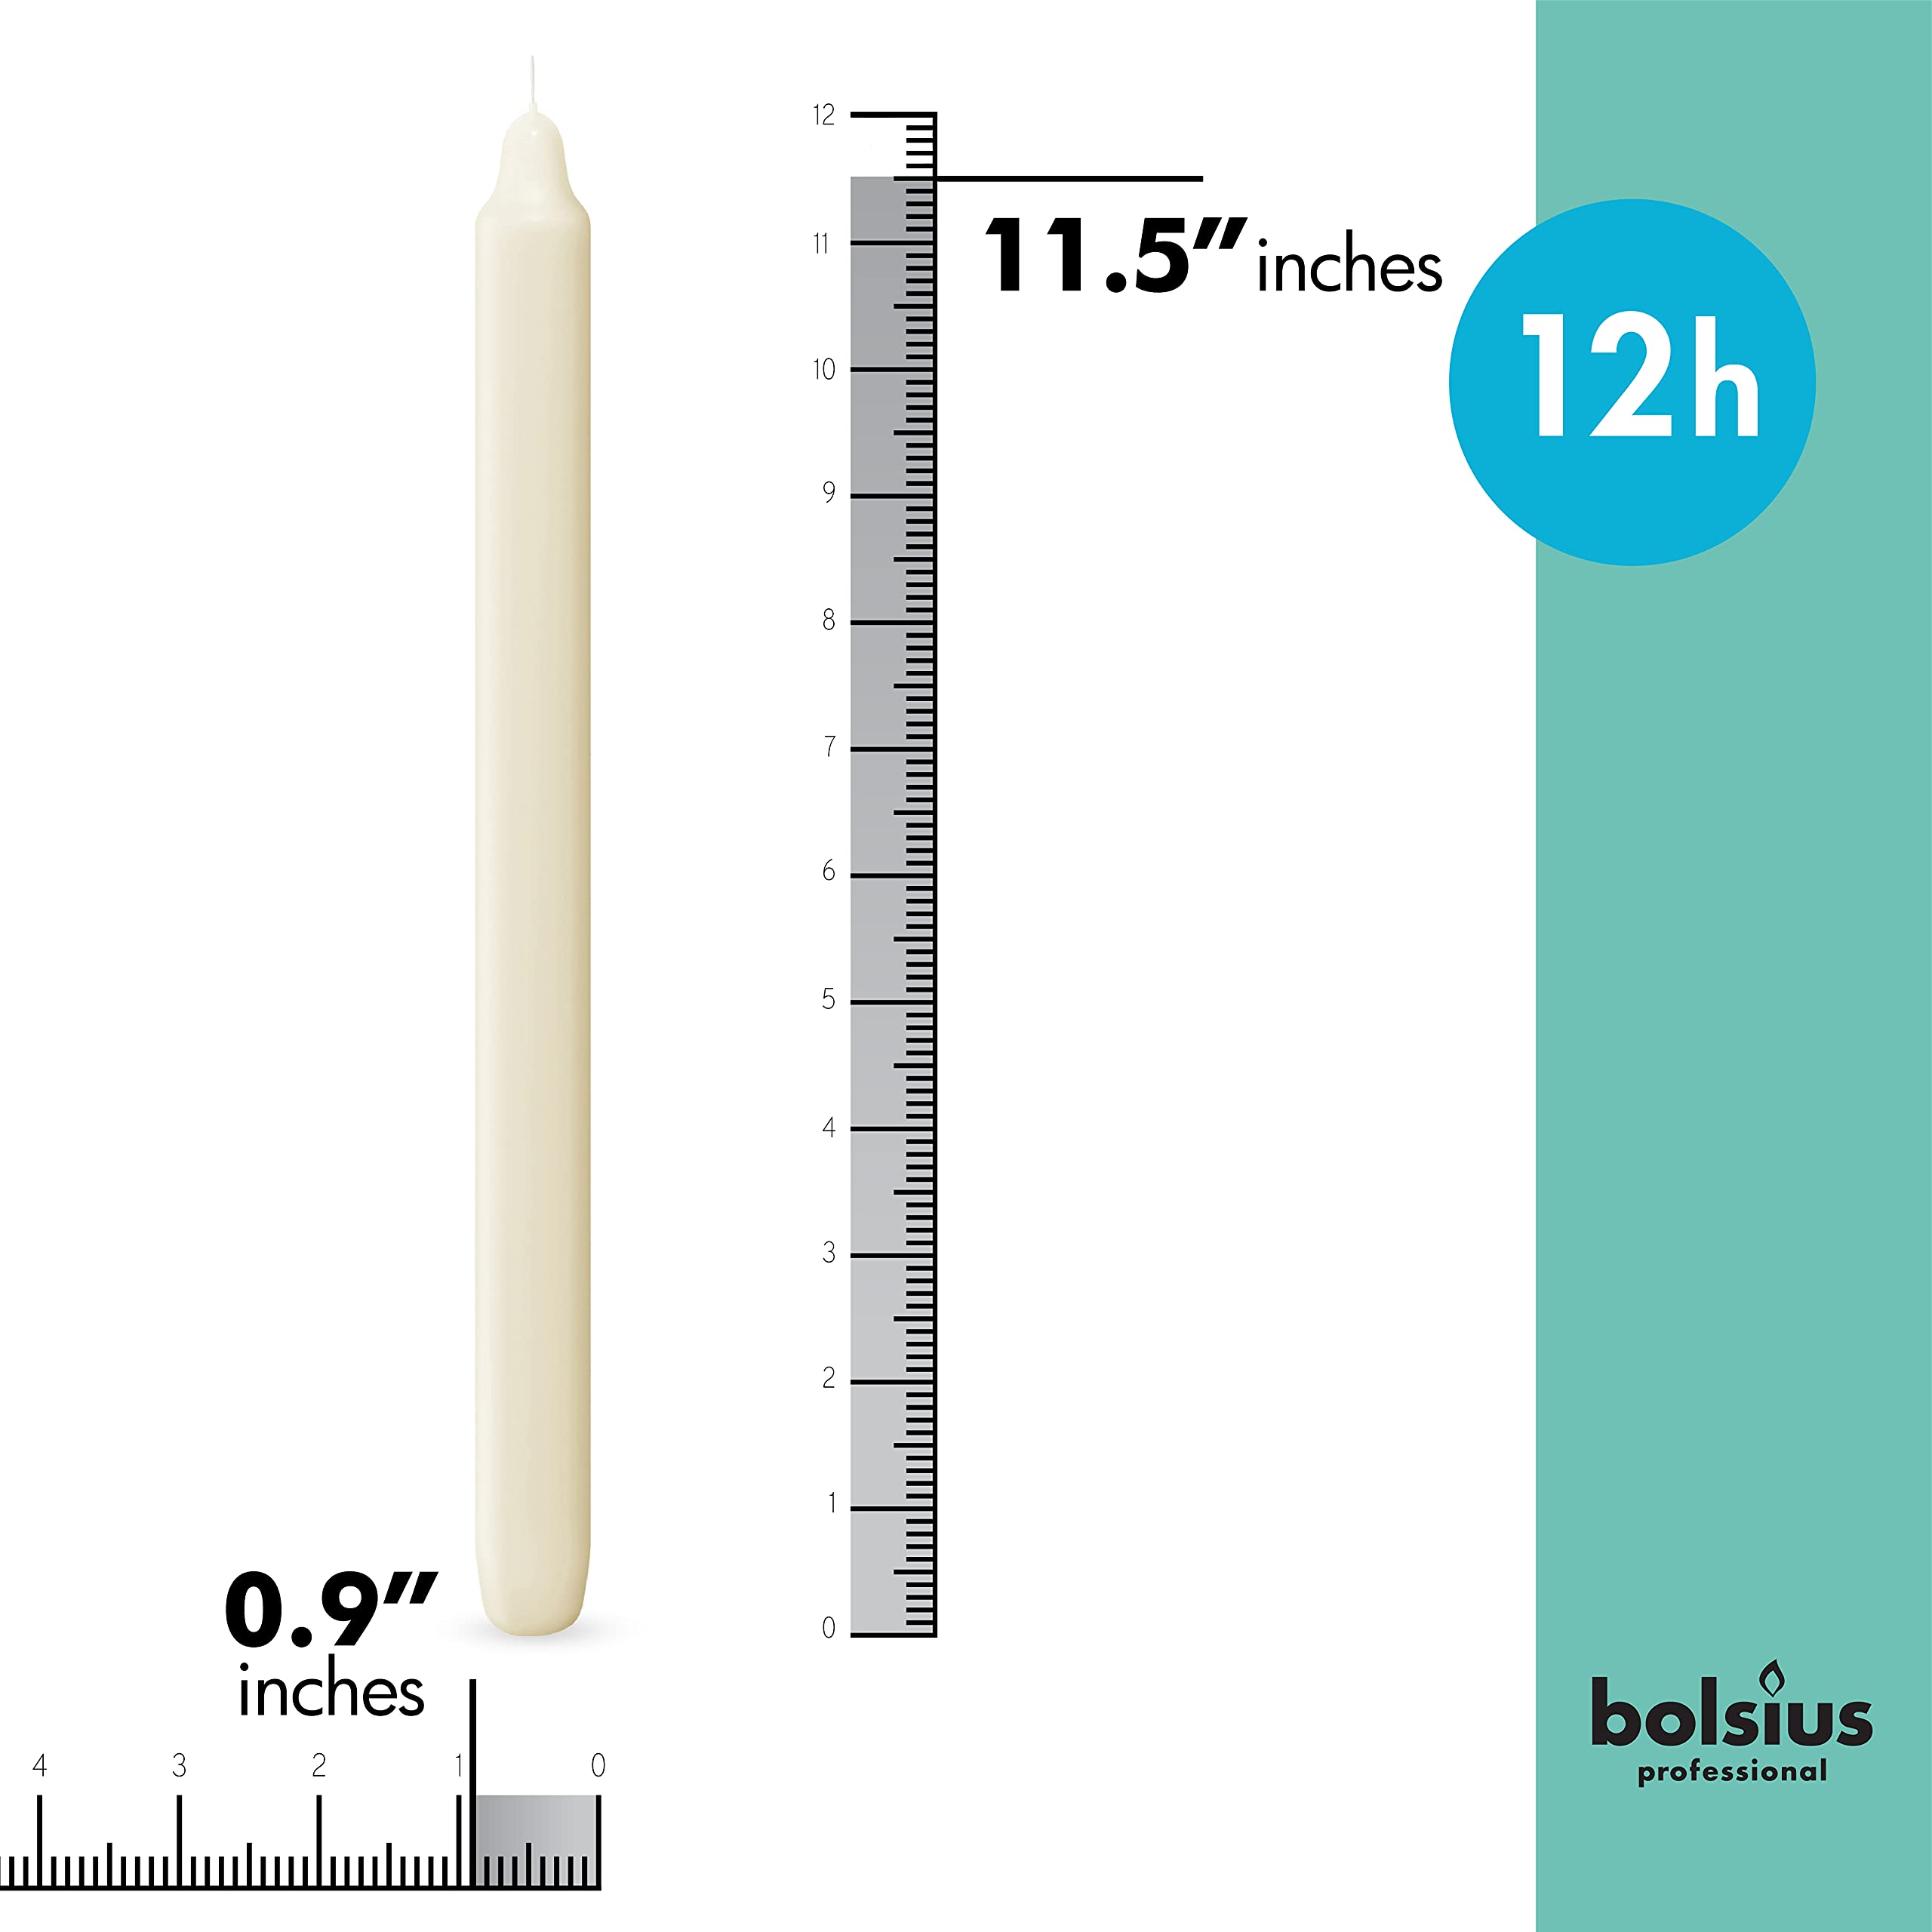 Bolsius Straight Unscented Ivory Candles Bulk Pack - 11-inch Long Candles - 12 Hour Long Burning Candles - Perfect for Emergency Candles, Chime Candles, Table Candles for Wedding, Dinner, Christmas  - Like New